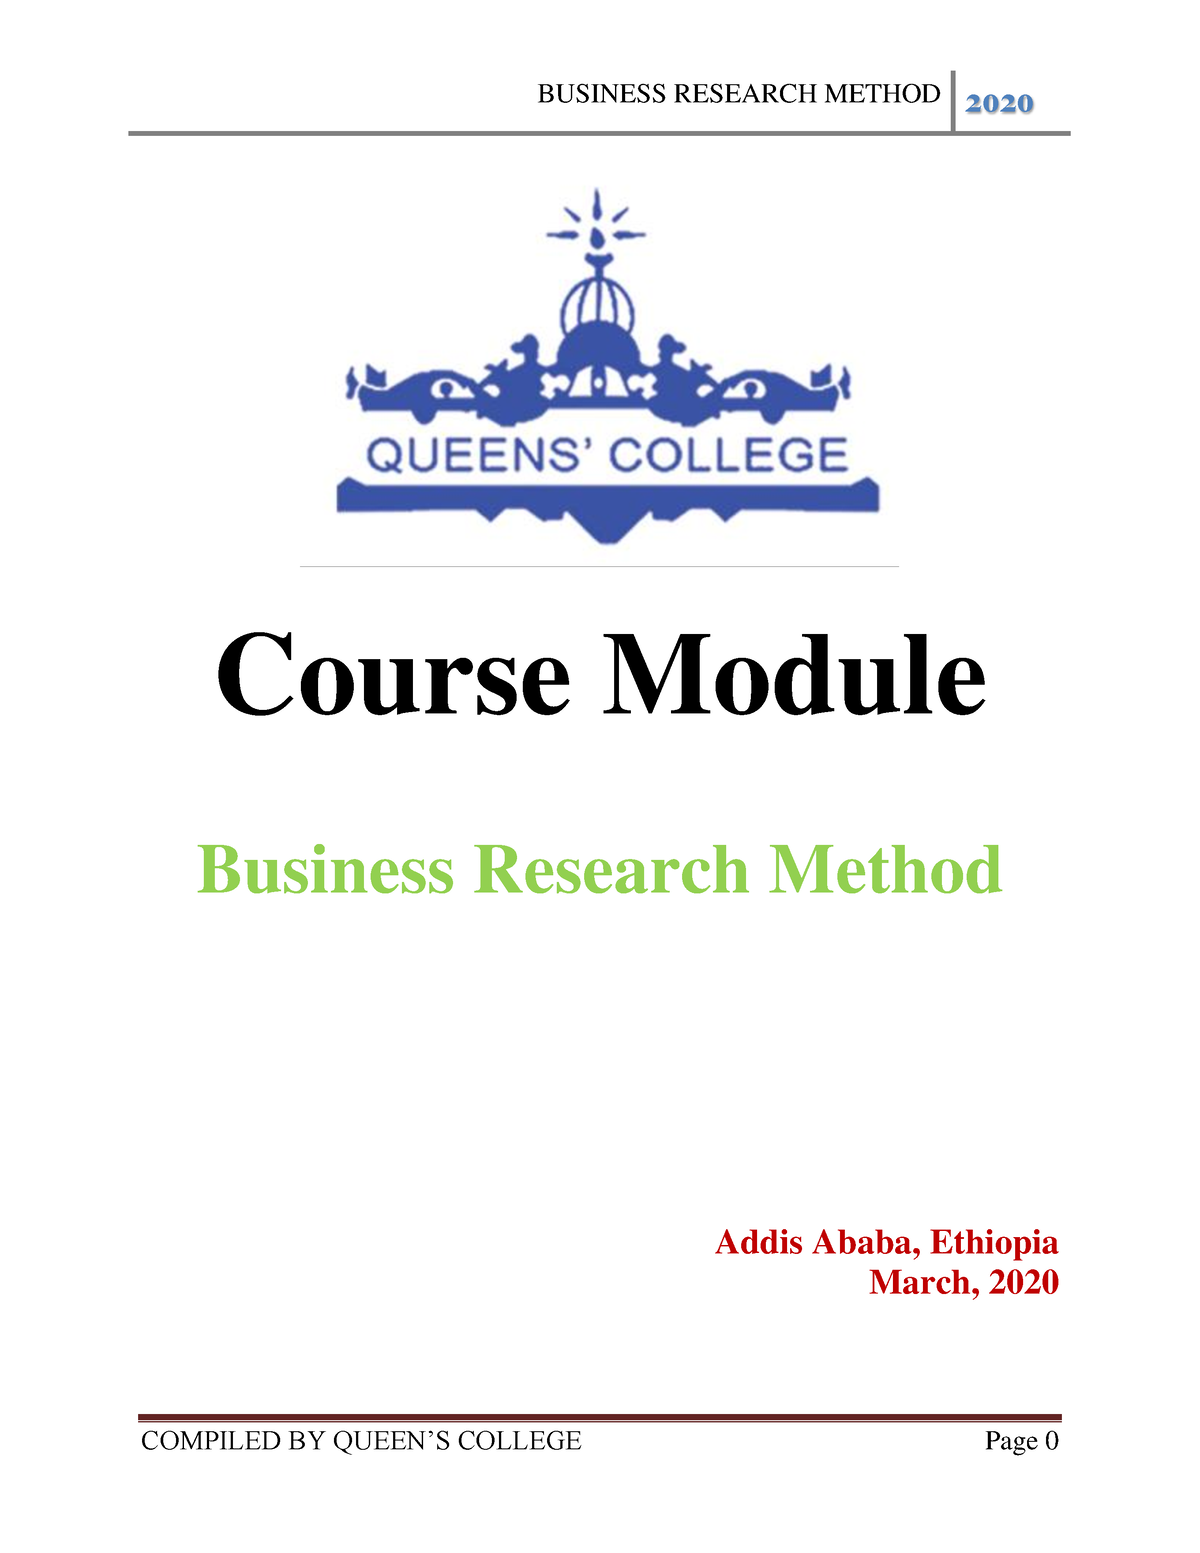 research on business management in ethiopia